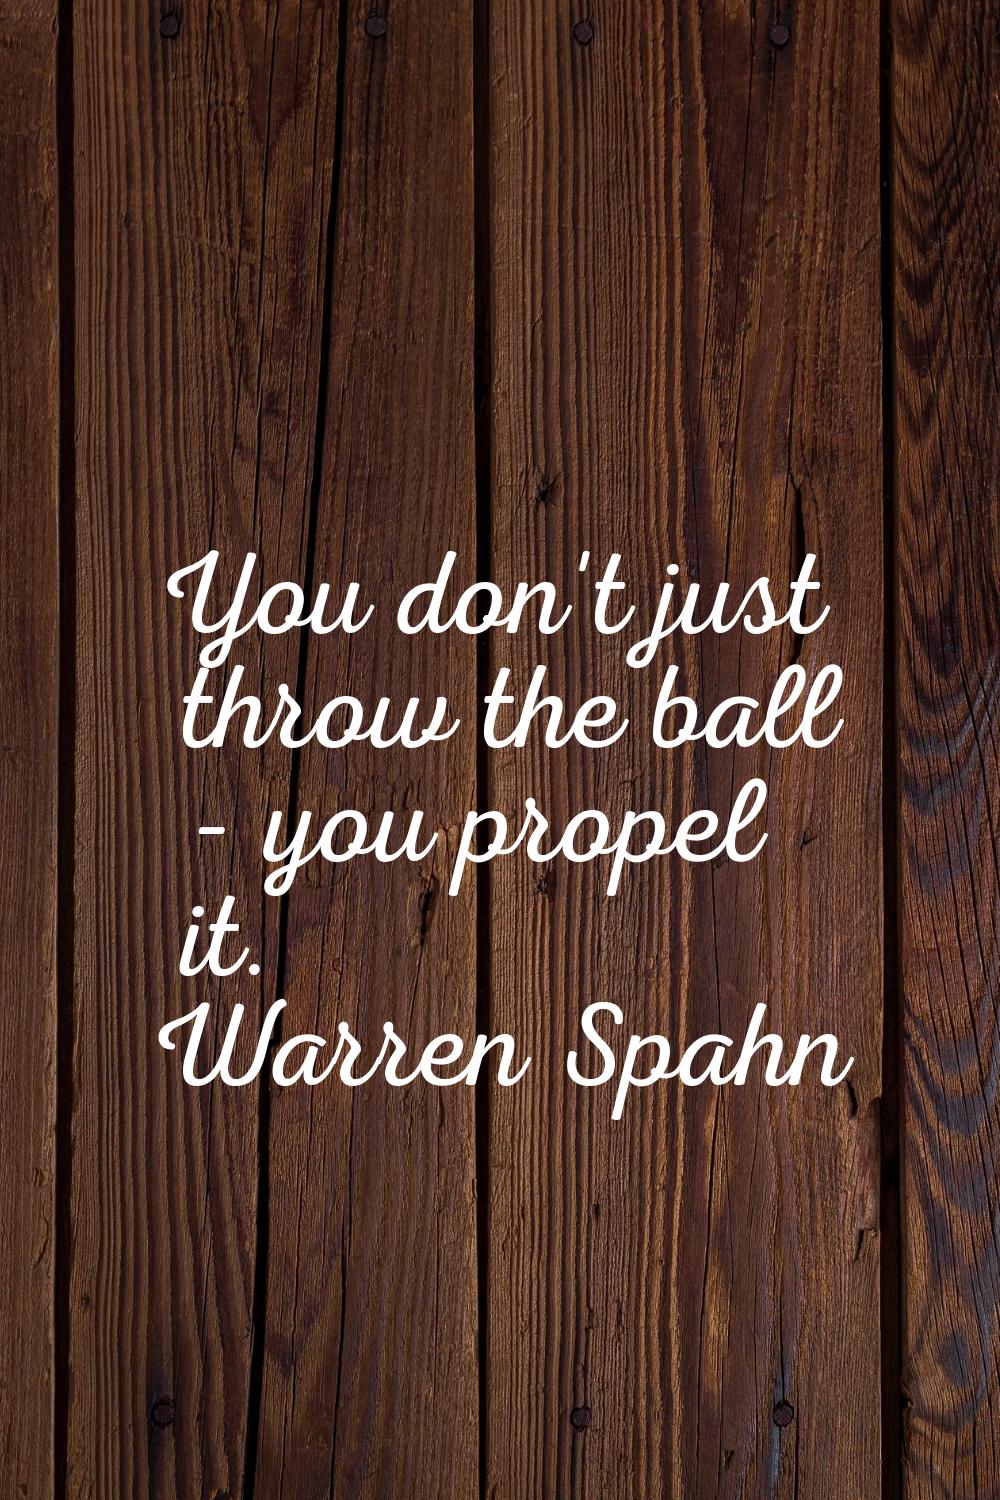 You don't just throw the ball - you propel it.